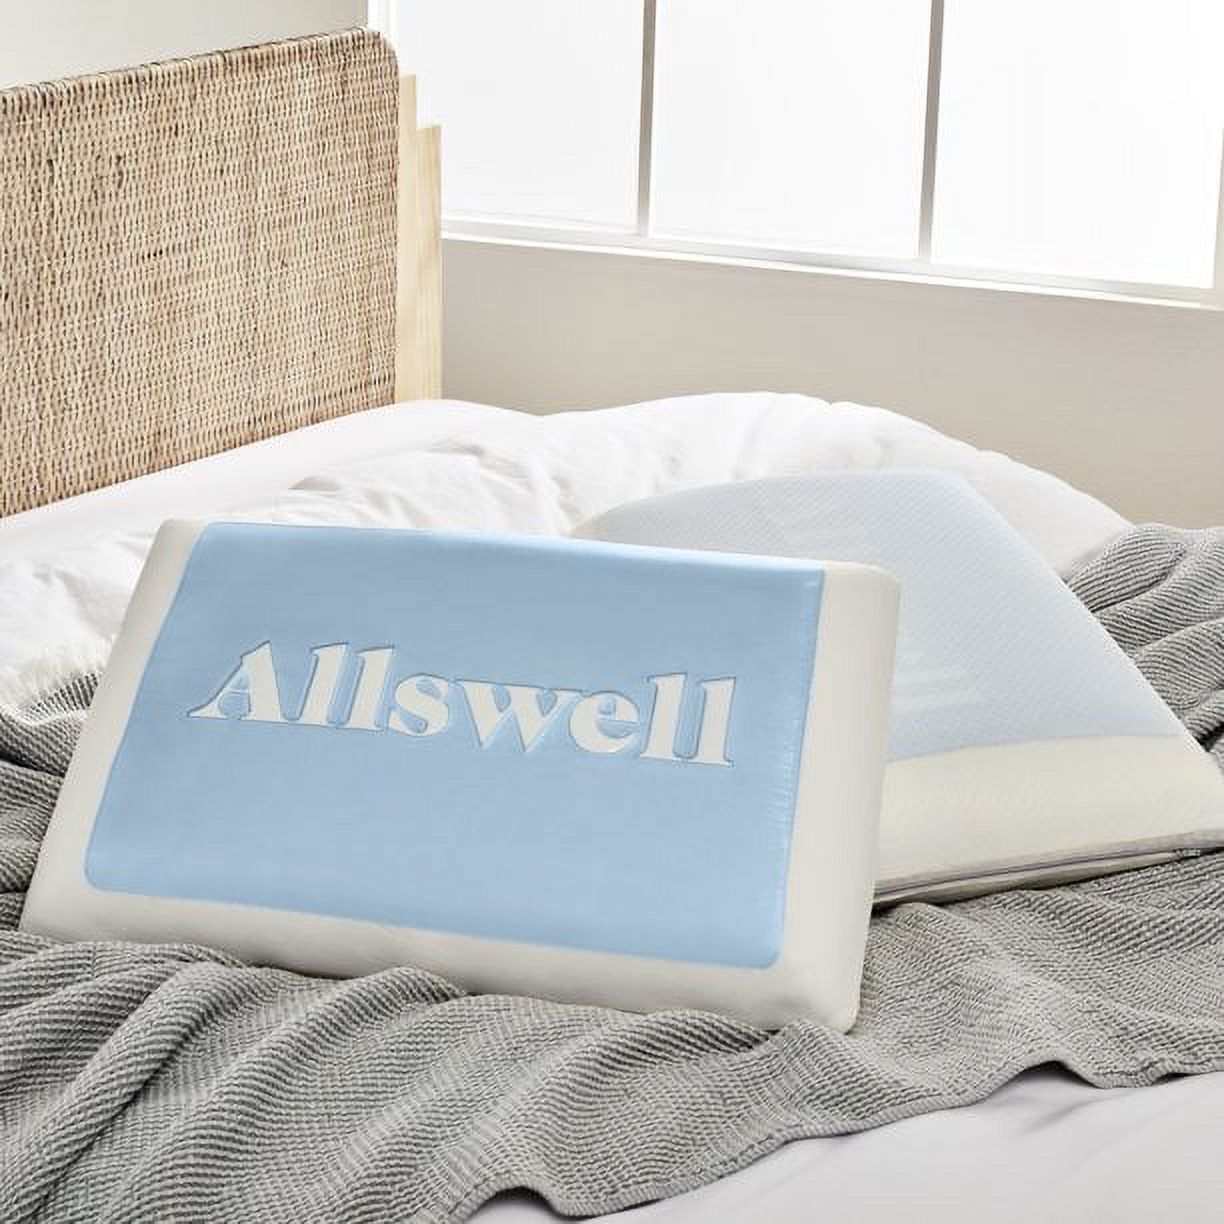 Allswell Cooling Gel Memory Foam Pillow, Queen Size - image 1 of 8